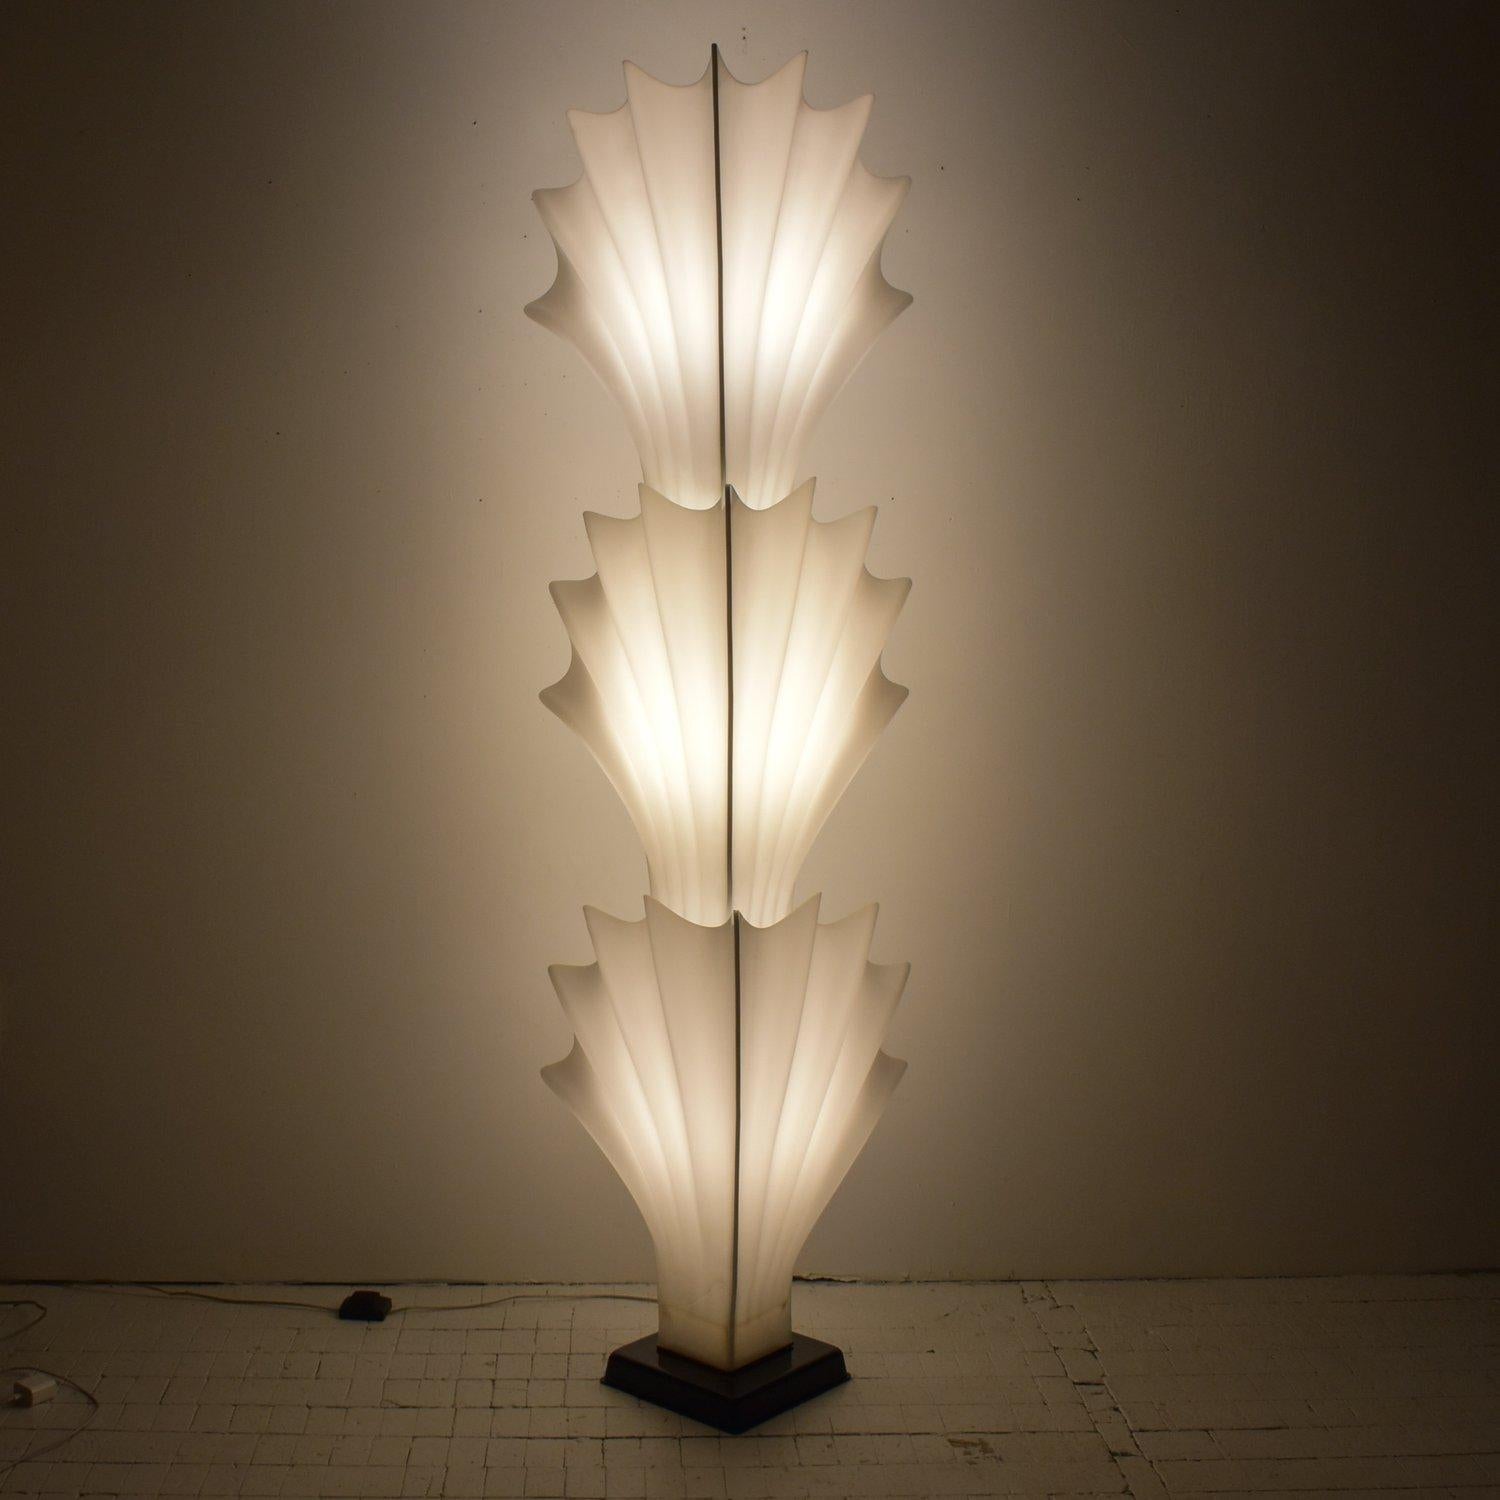 Vintage Tiered Molded Plexi Shell Floor Lamp by Roger Rougier, Circa 1970s. Monumental trompe l’oeil scalloped shell floor lamp by French-Canadian designer, Roger Rougier. Three large-scale, milky-white bifurcated plexi seashells, slightly